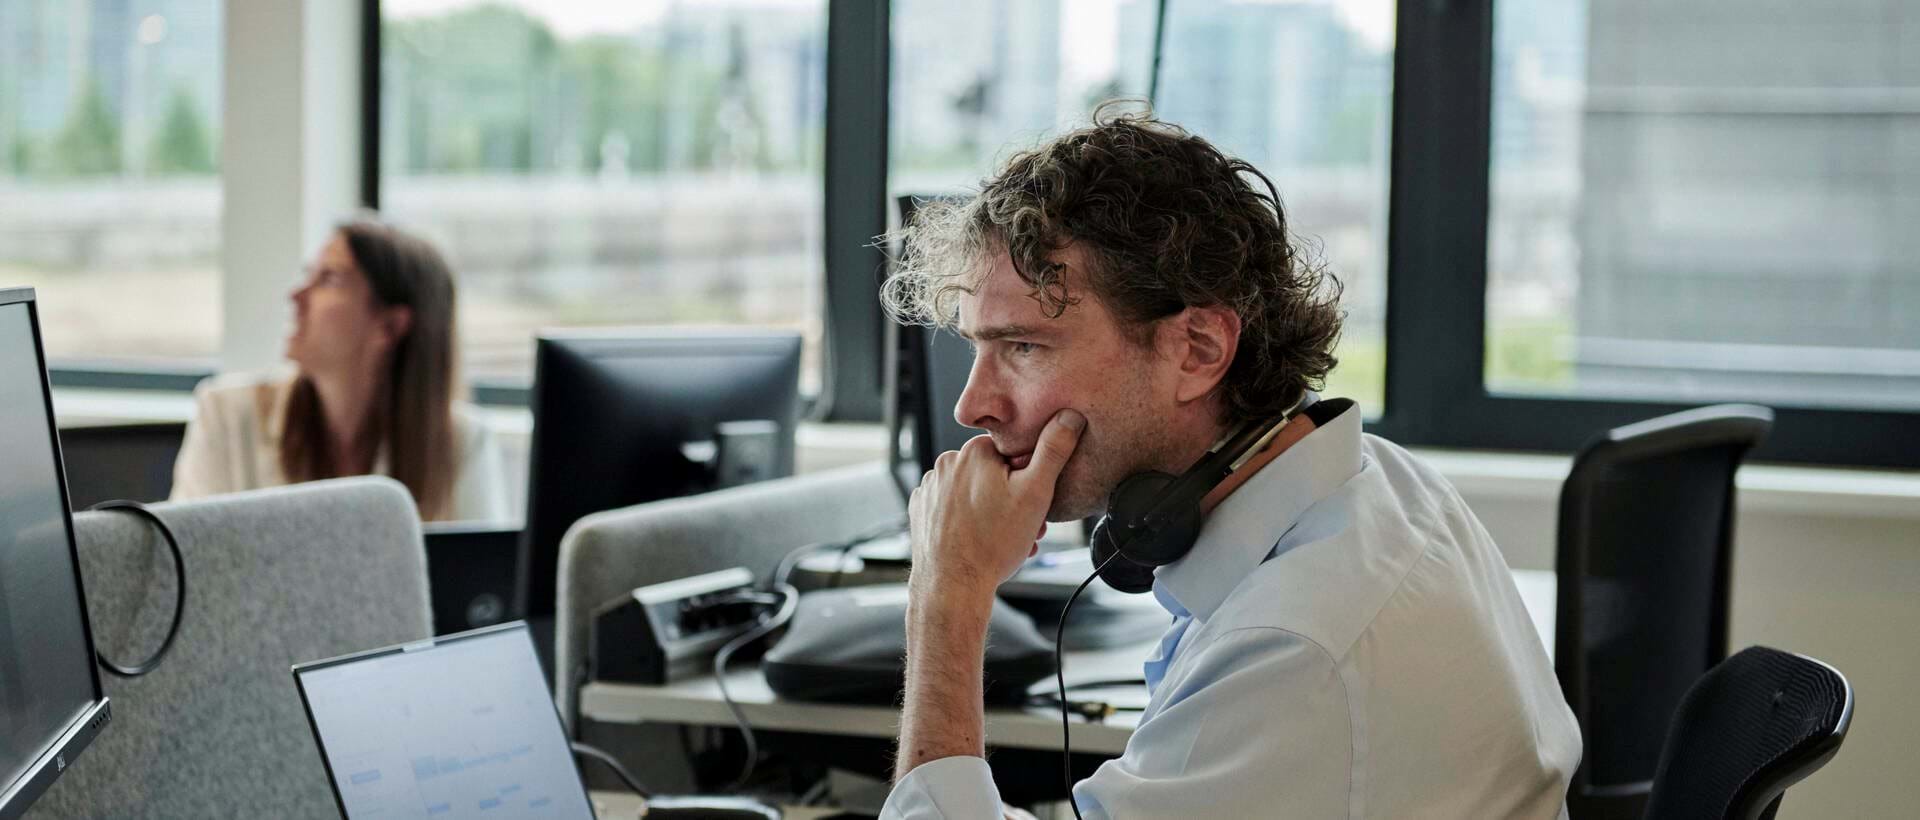 A man sits at a computer in an office by a big window, looking pensive.